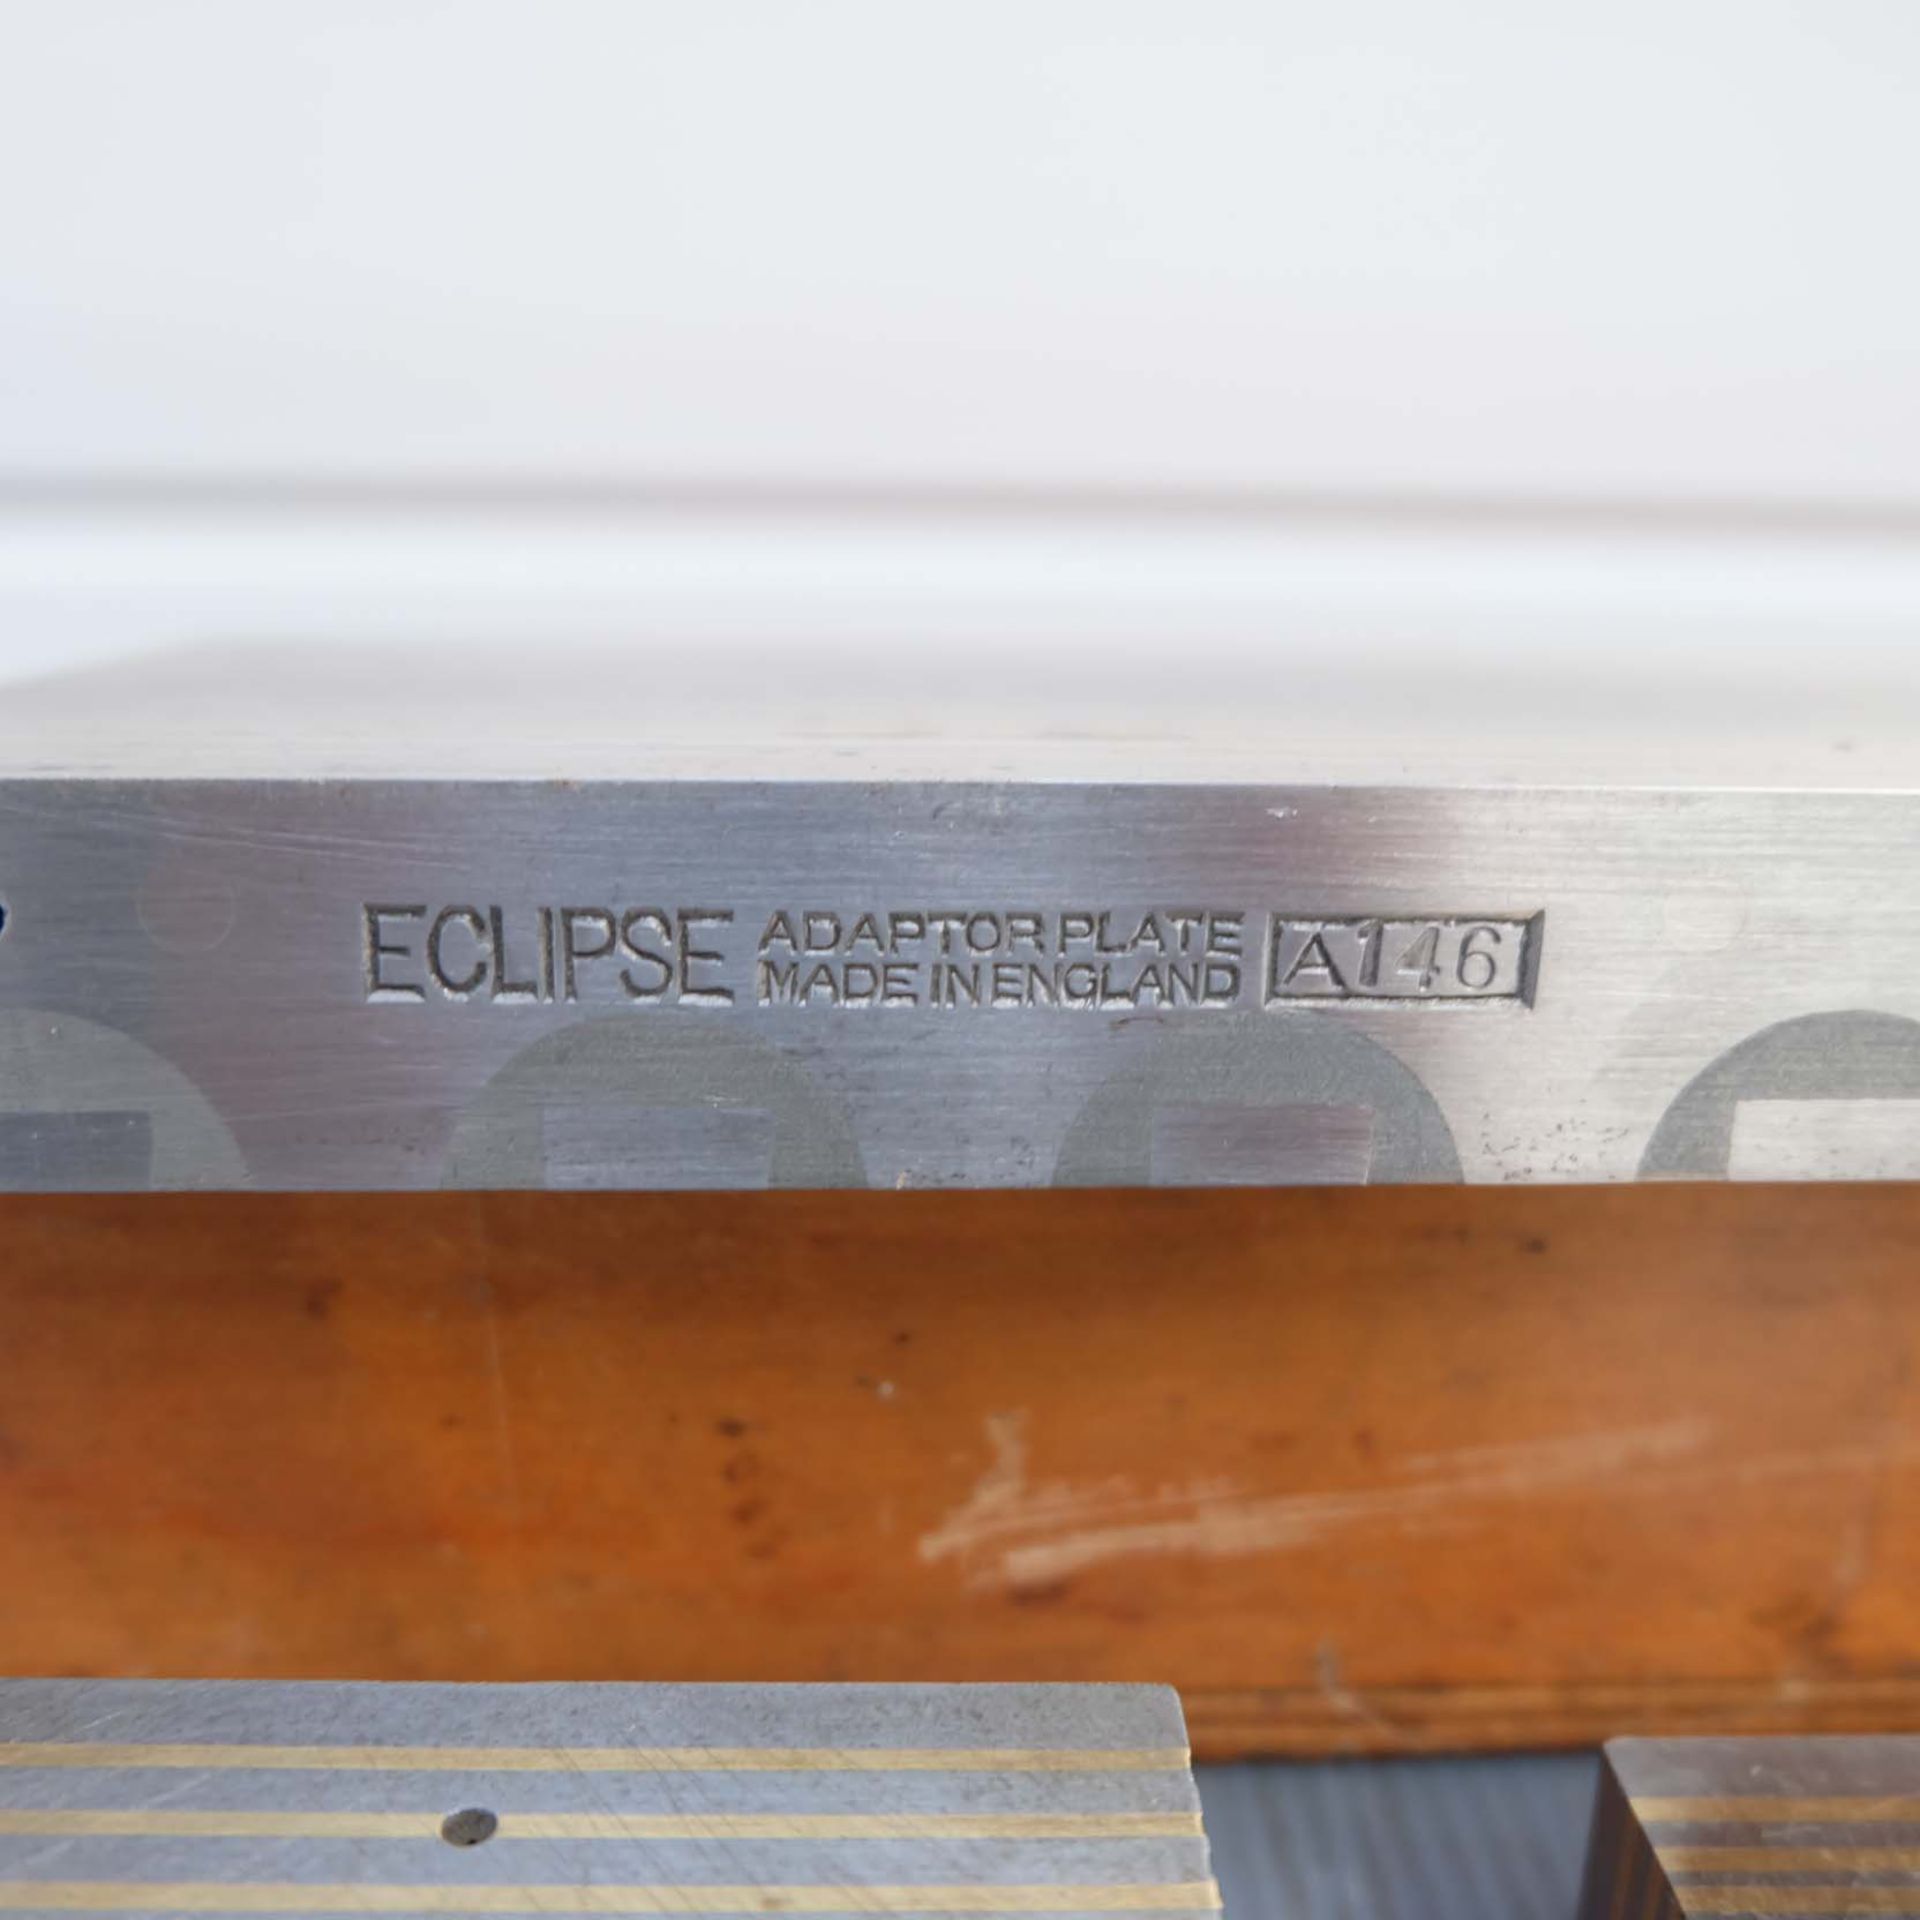 Eclipse Model A146 Adaptor Plate Size 11" x 4 1/8" for Magnetic Chucks. Plus 6 Smaller Blocks - Image 5 of 6